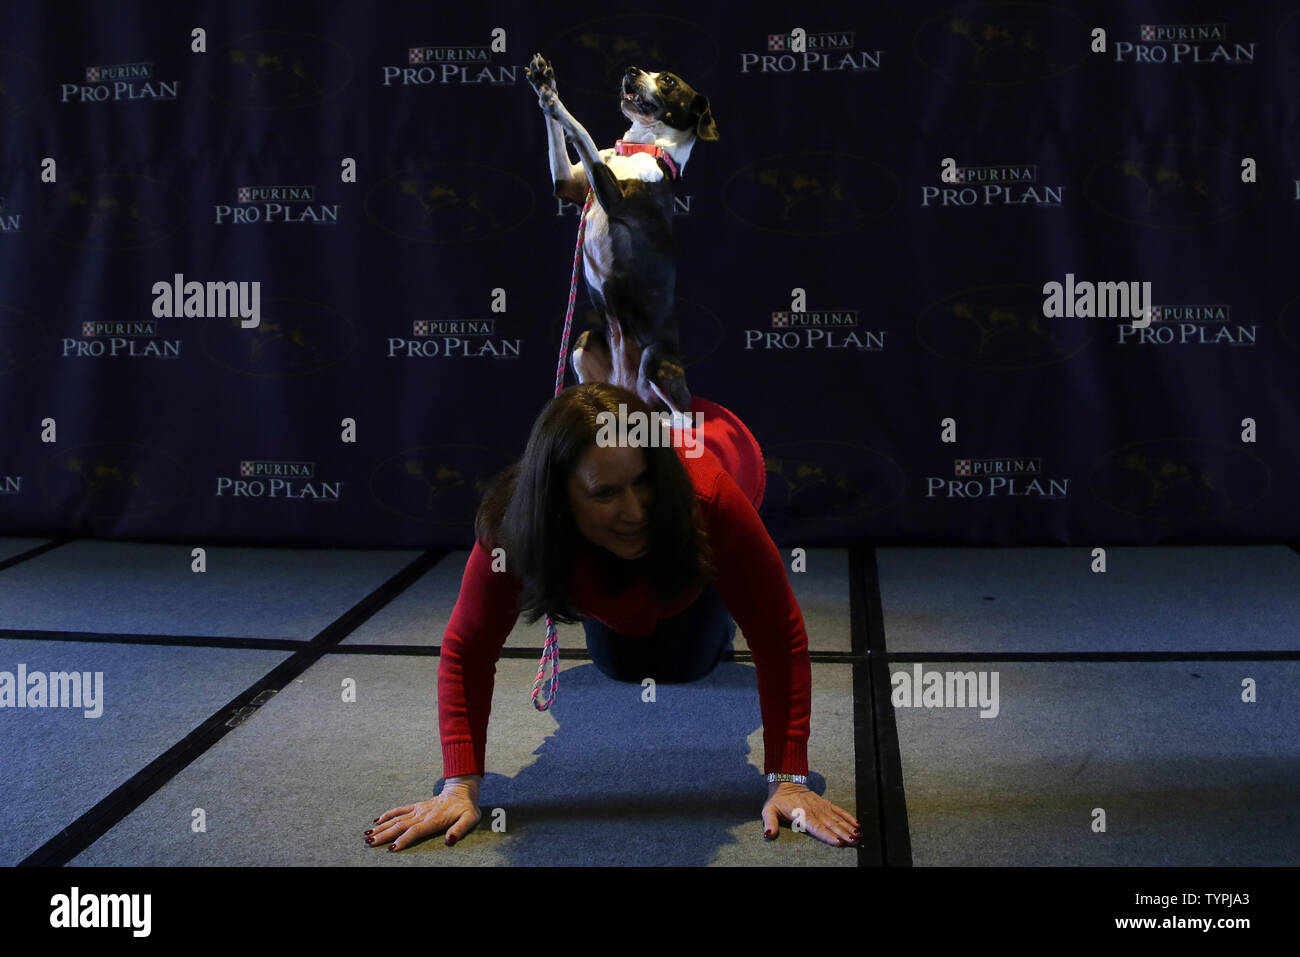 Karen Profenna of New City, New York demonstrates agility with Mixed Breed dog Hailey at a press conference just weeks before the 139th Annual Westminster Kennel Club Dog Show in New York City on January 21, 2015. The first Westminster show was held on May 8, 1877, making it the second-longest continuously held sporting event in the United States behind only the Kentucky Derby, which was first held in 1875.  Photo by John Angelillo/UPI Stock Photo